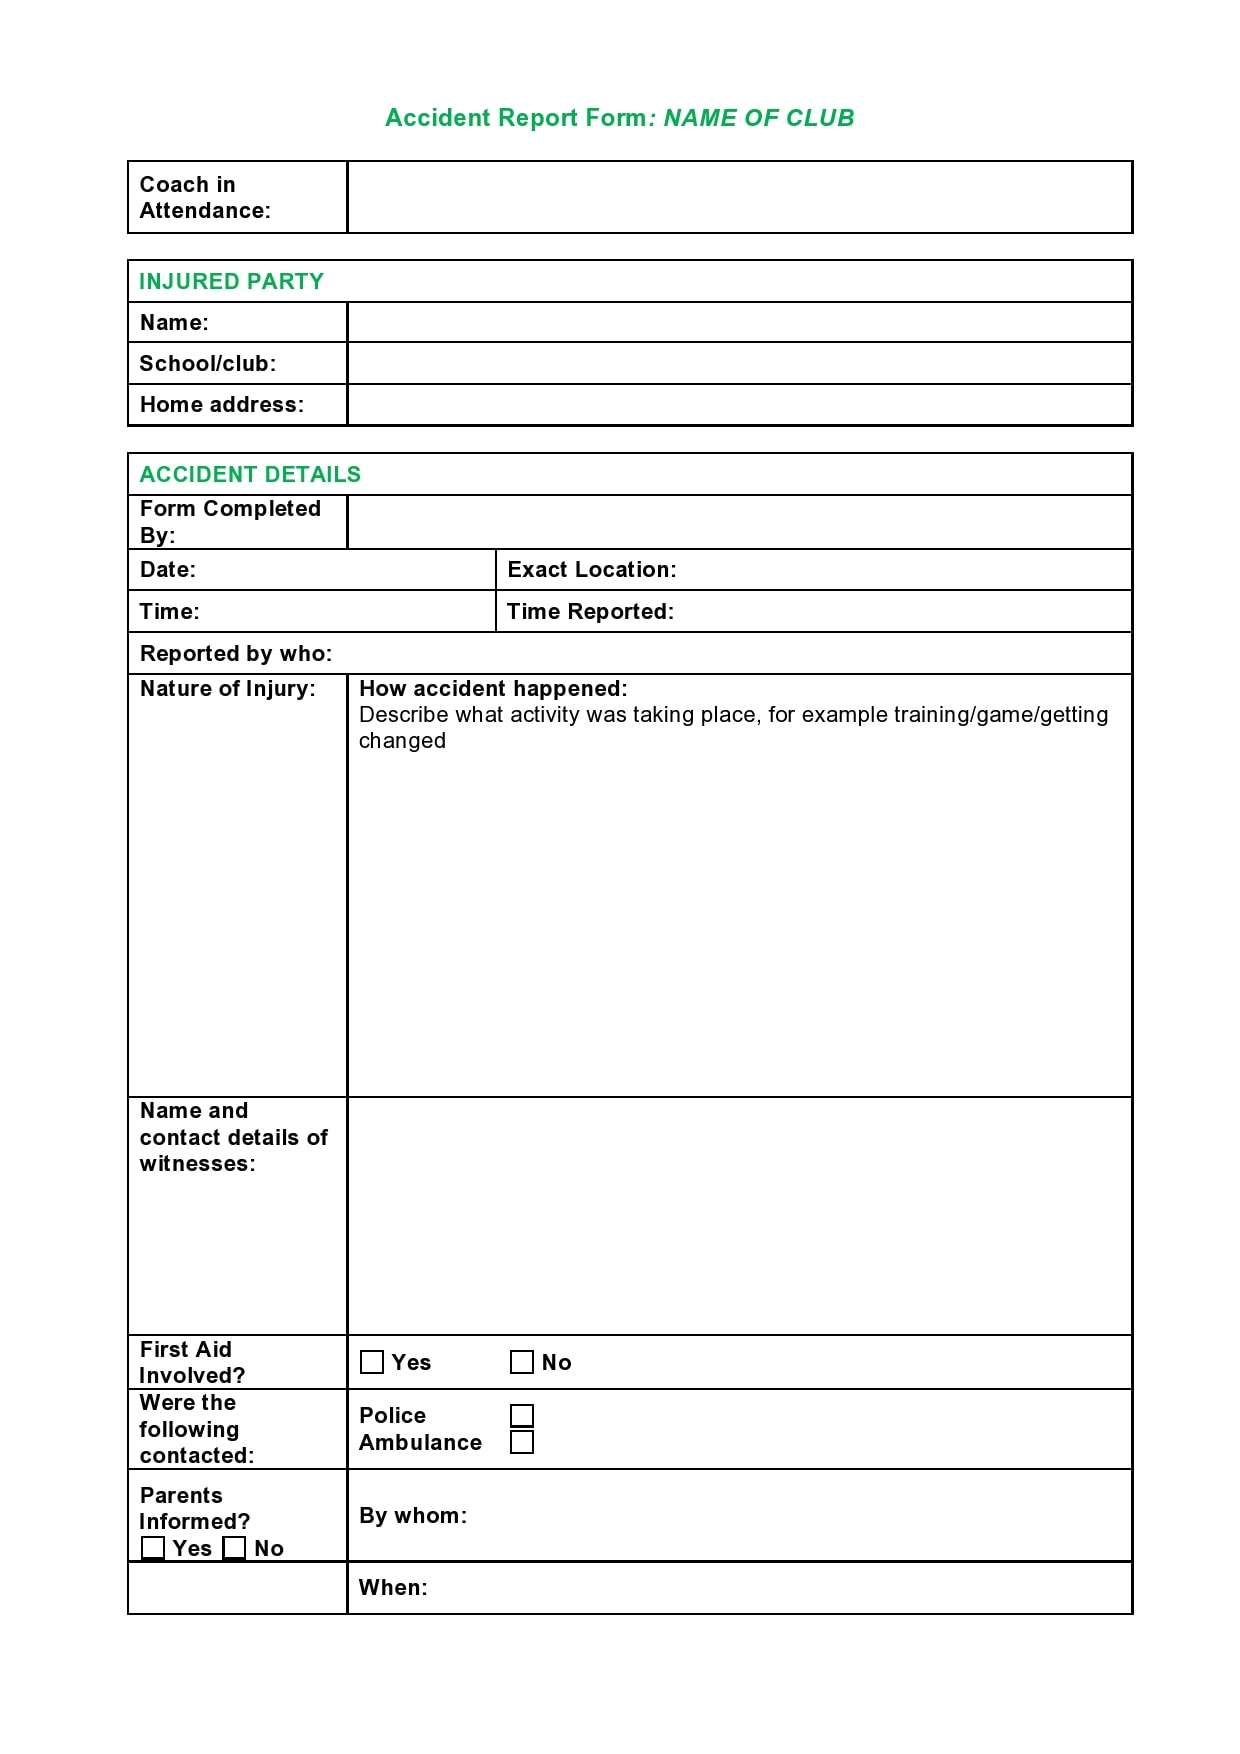 50 Accident Report Forms (Car Work Injury more ) TemplateArchive